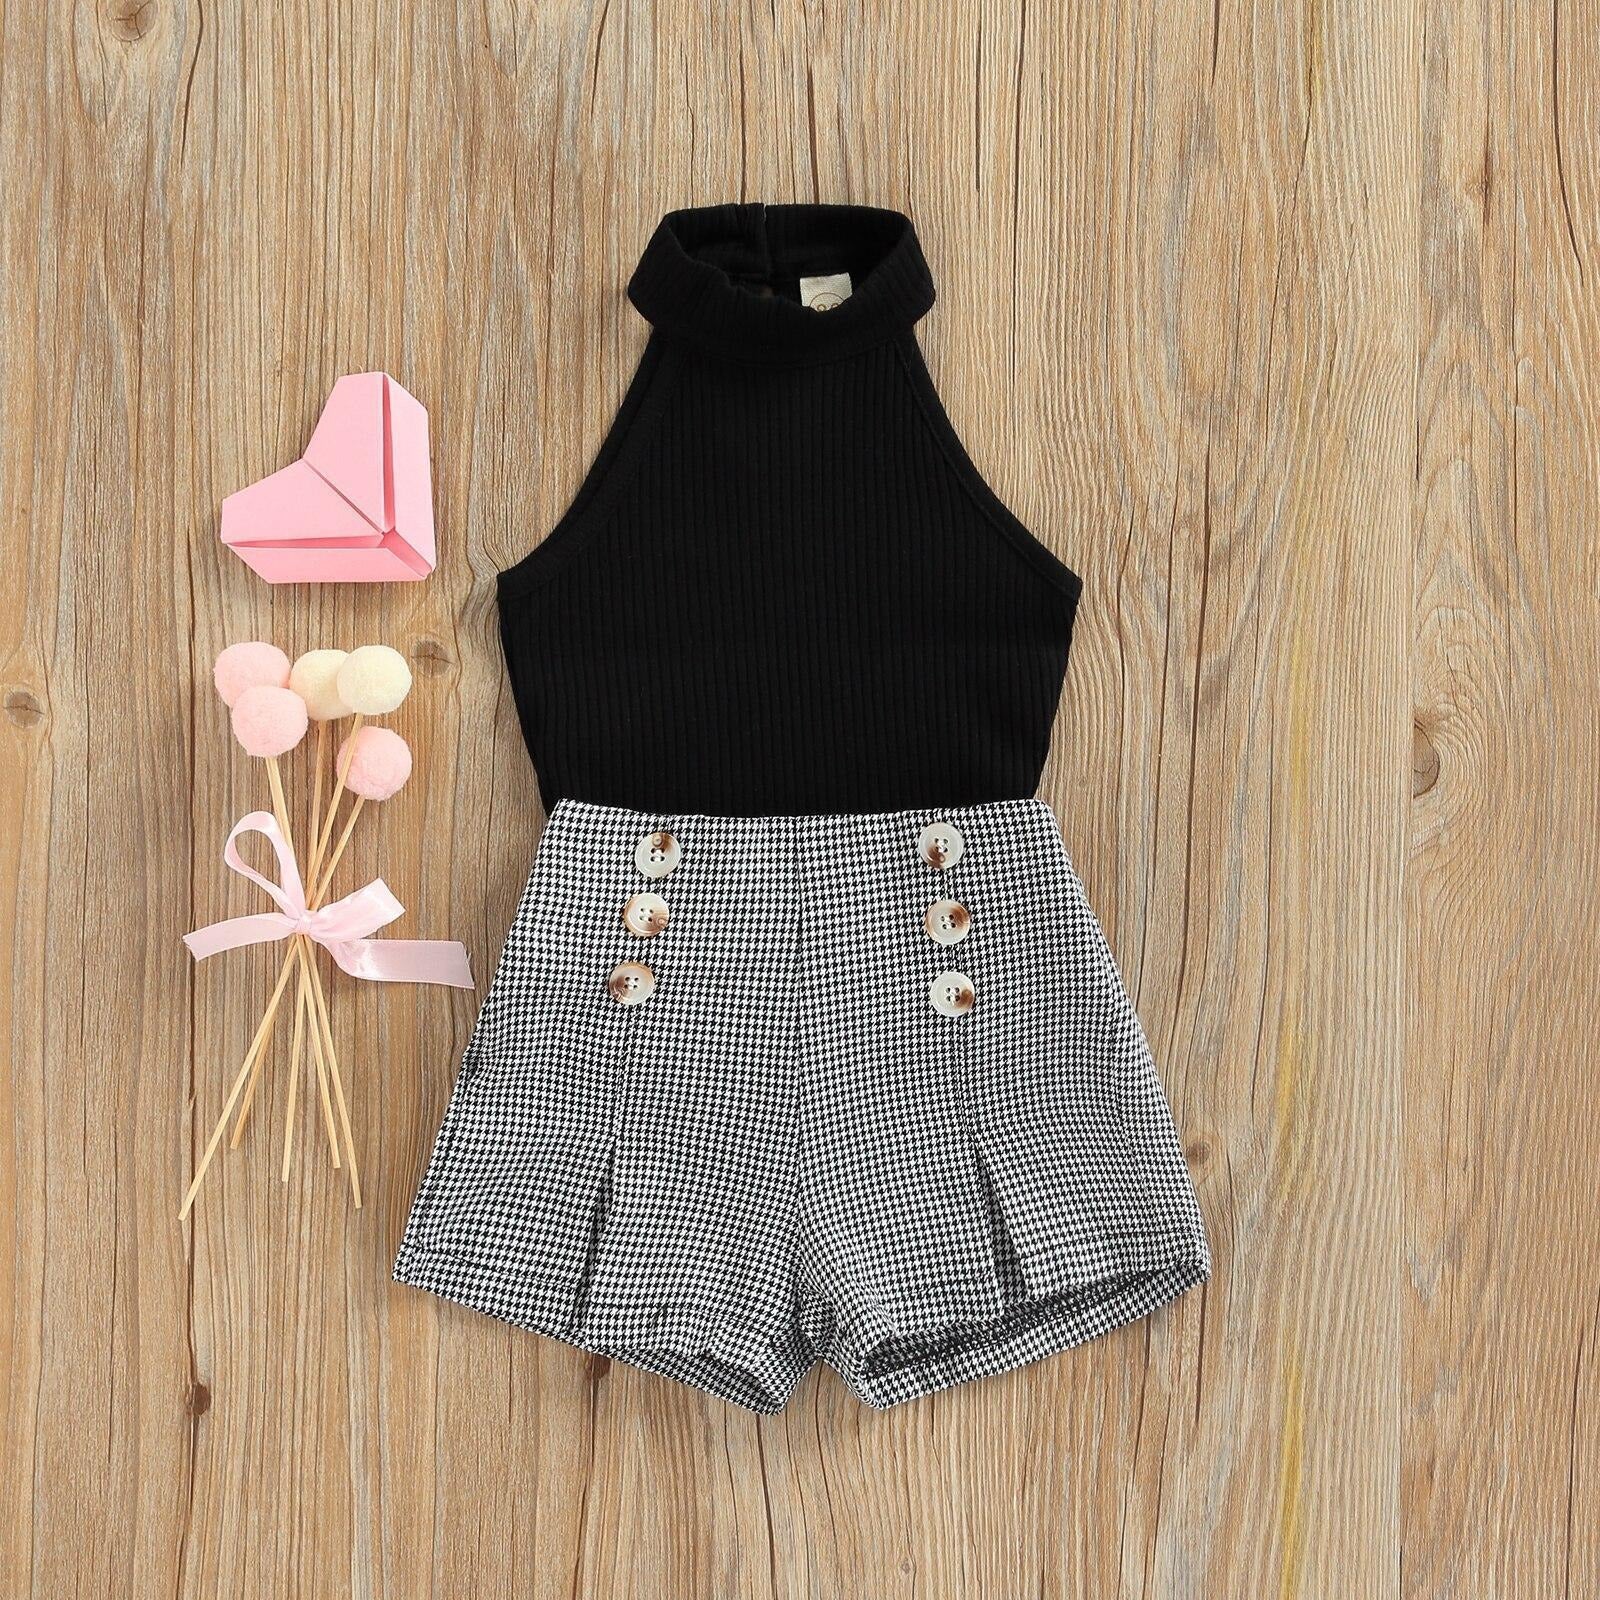 Fashionable and Versatile Outfit for Girls by SHEIN